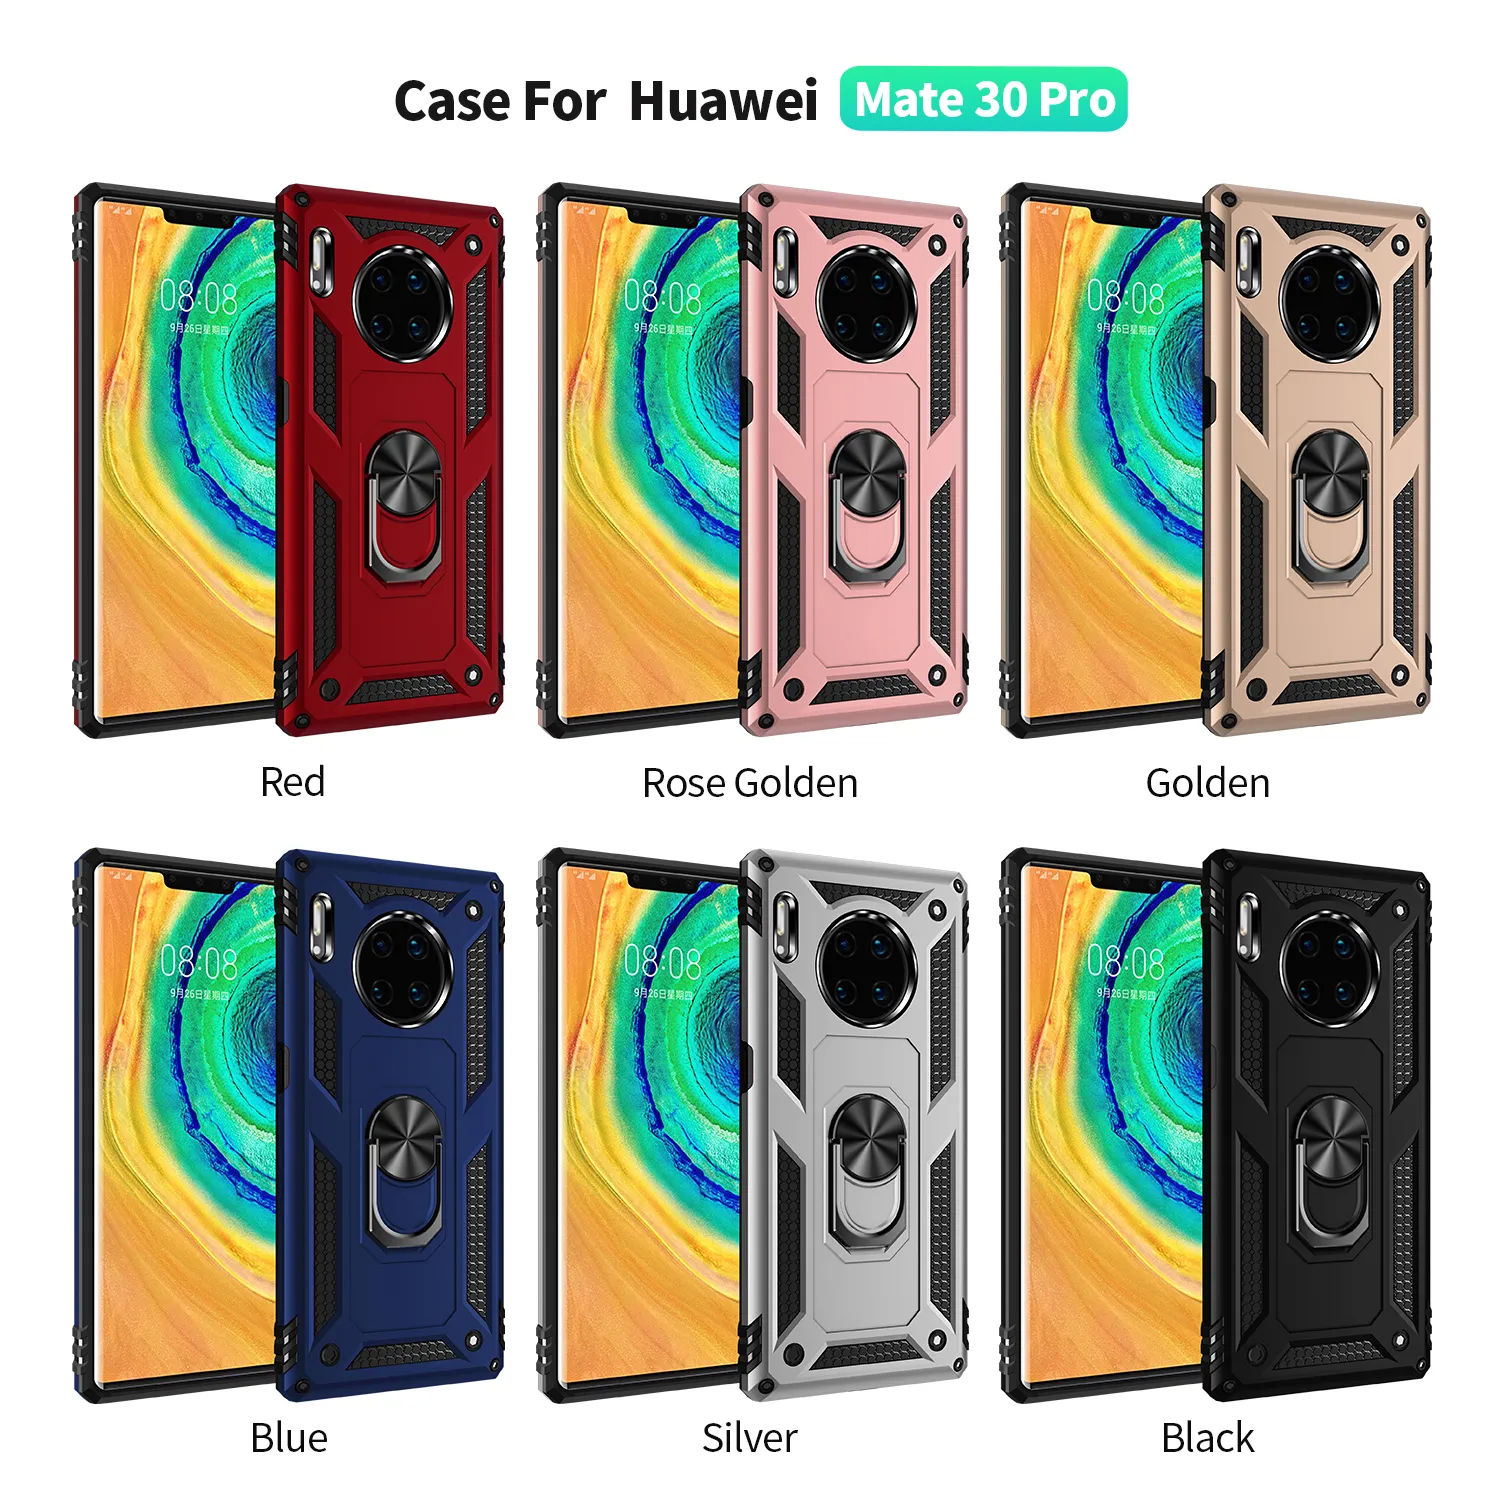 Military Blade Metal Kickstand Case för Huawei Mate 30 Pro Mate 30 P30 Pro P20 Lite Mate20 Lite Drop Tested Protective Cover